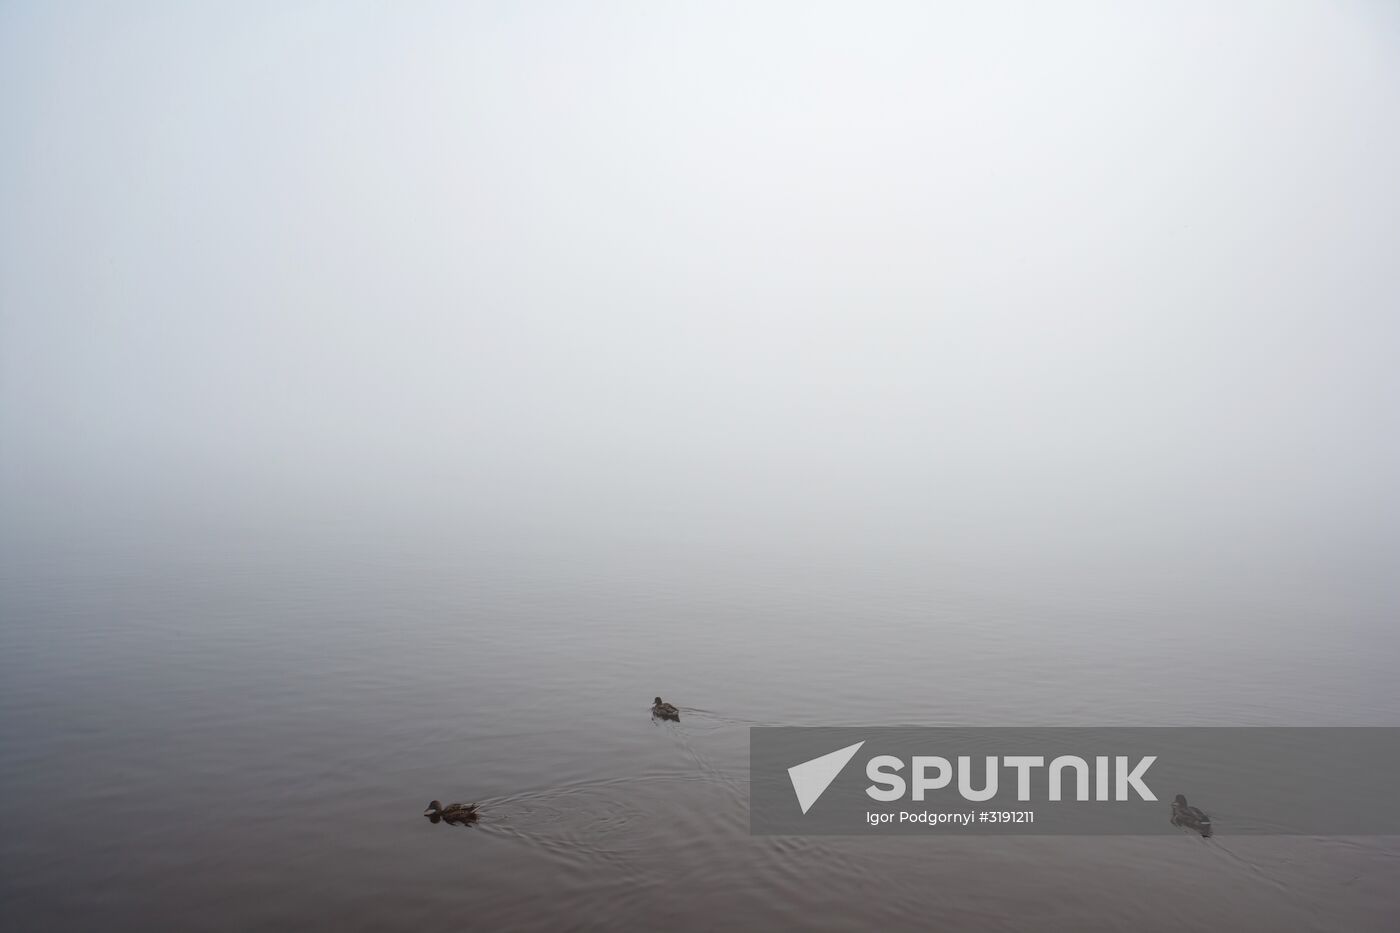 Petrozavodsk, Russia. Birds on a local waterfront.